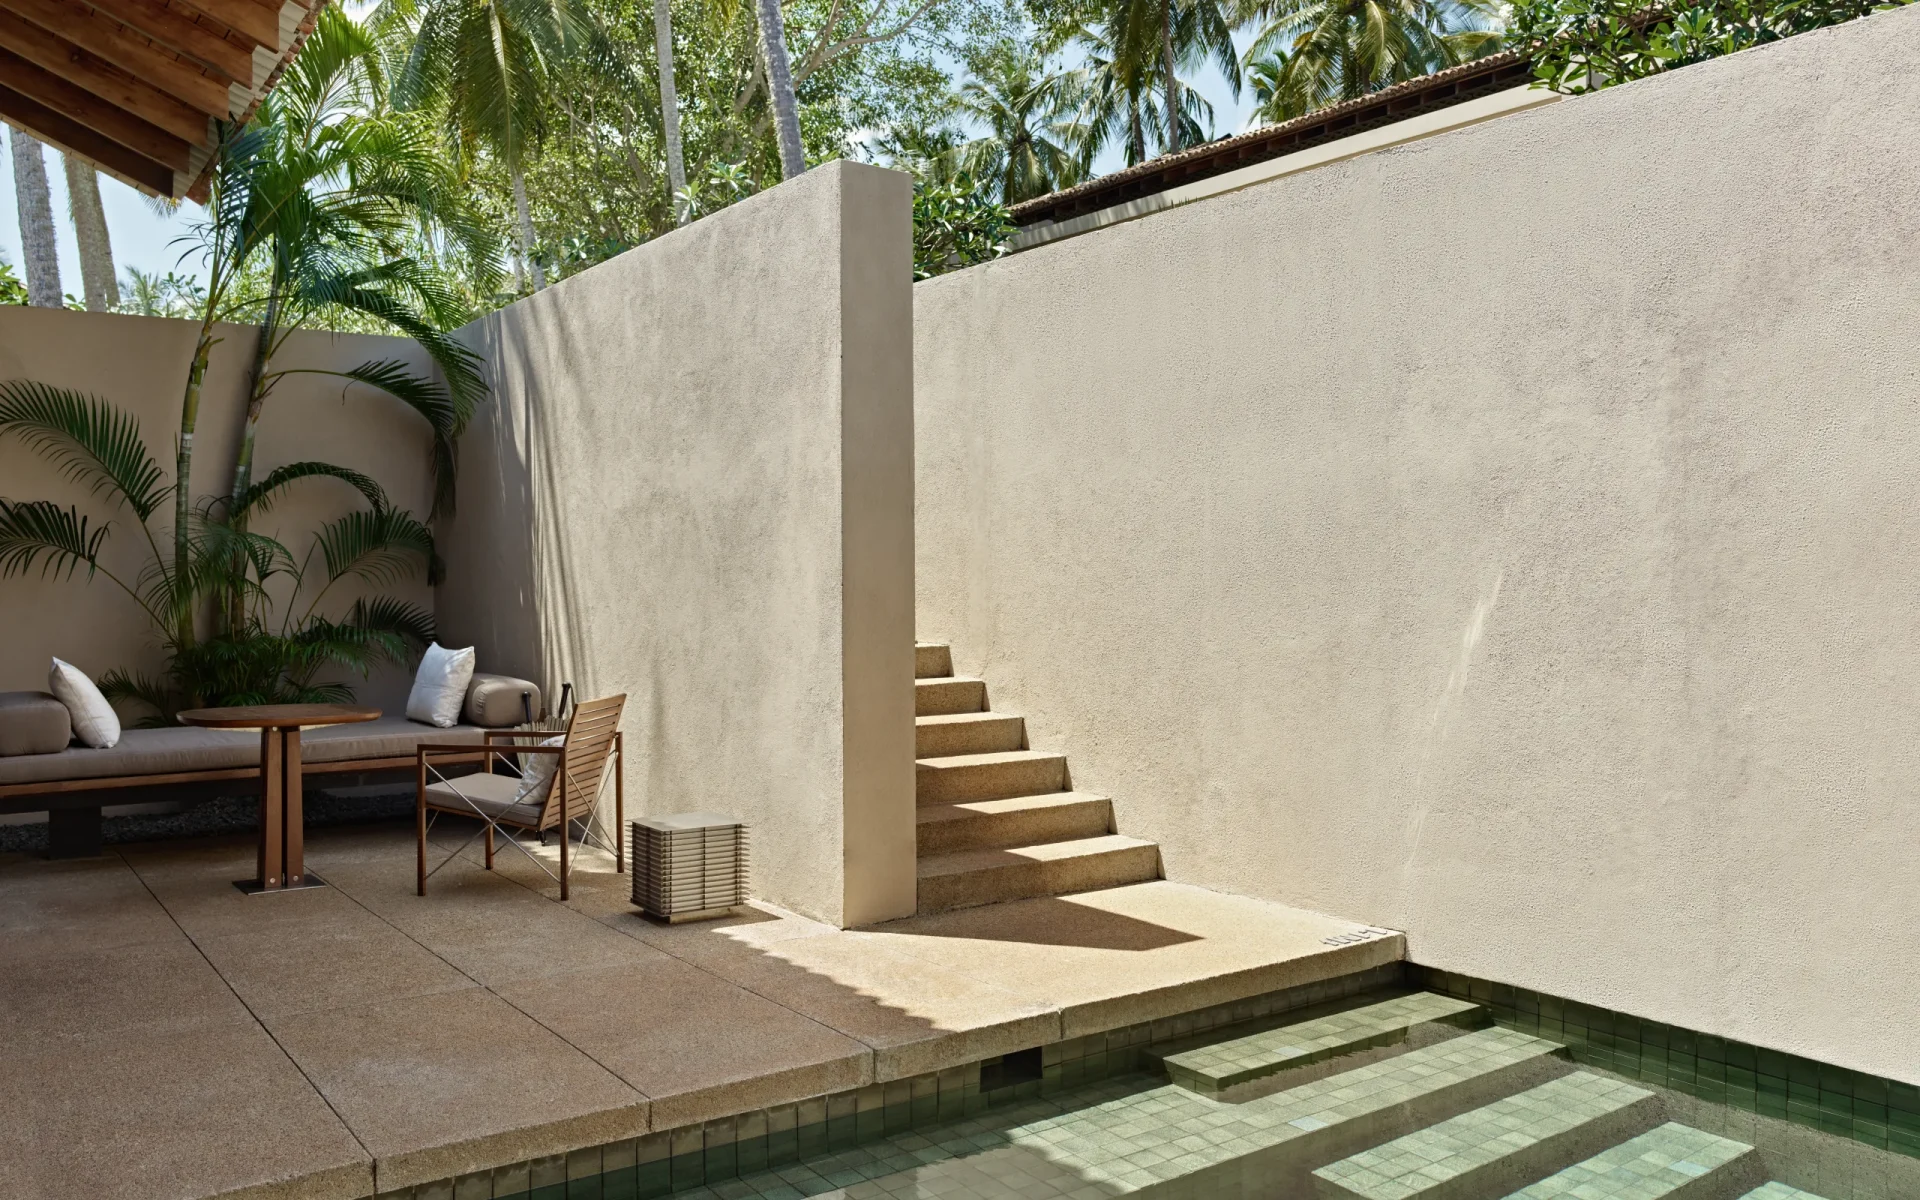 Amanwella villas have a plunge pool and outdoor seating.